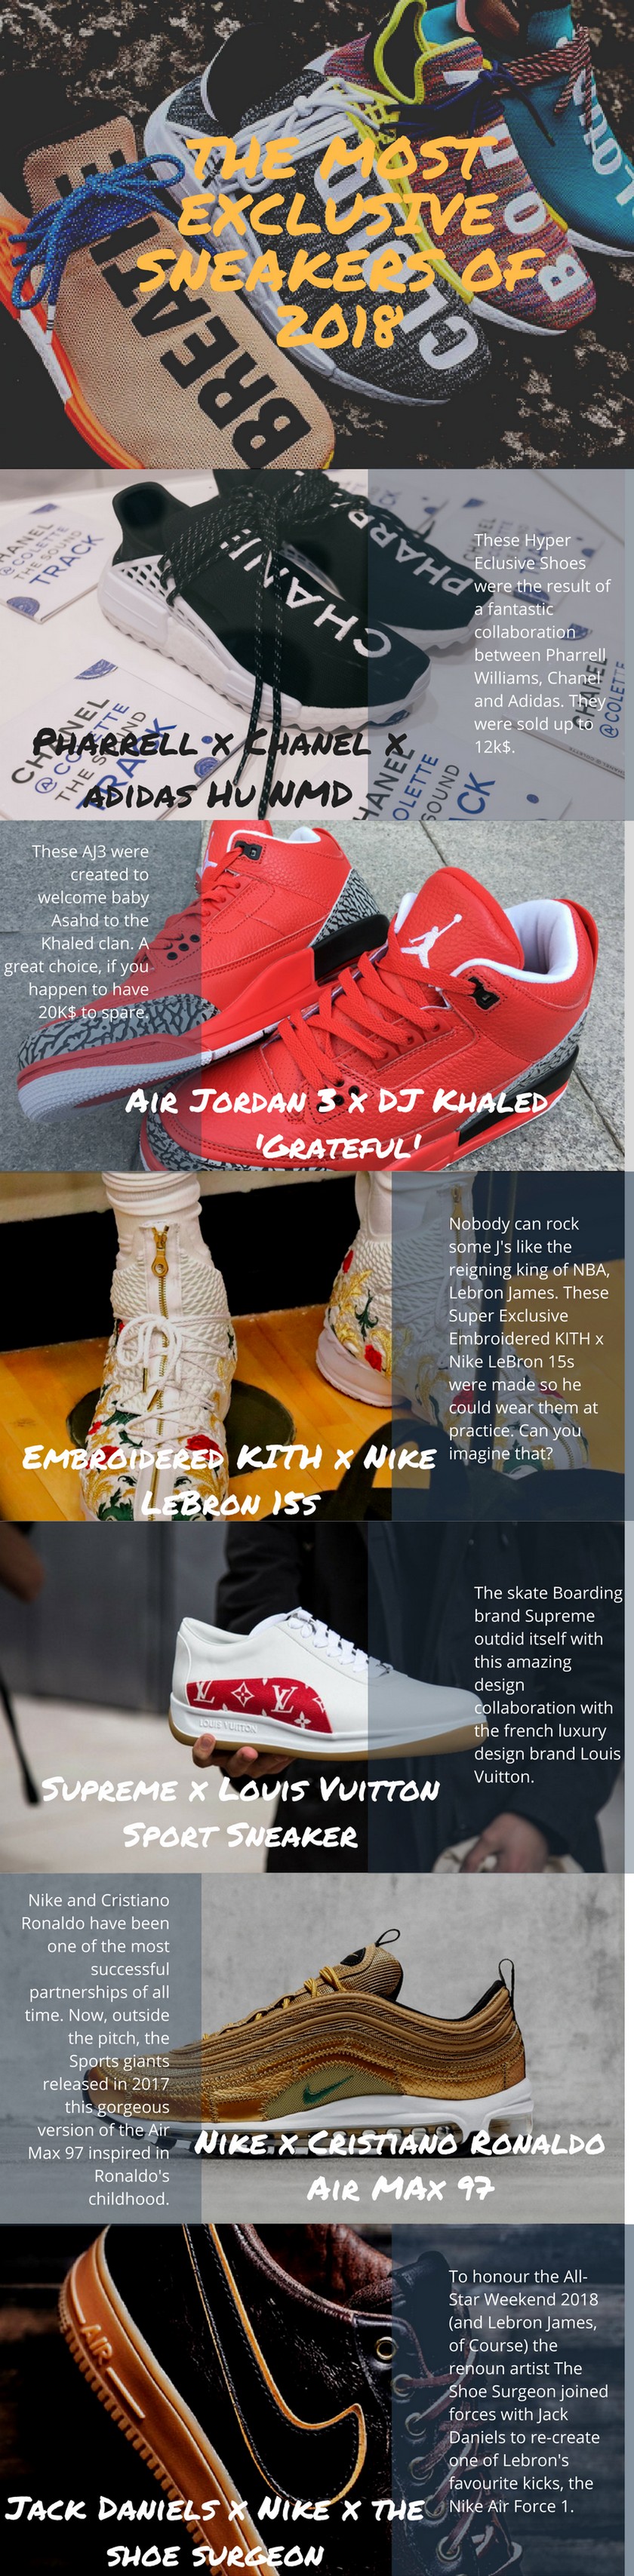 Fashion Design: The Most Expensive Sneakers 2018